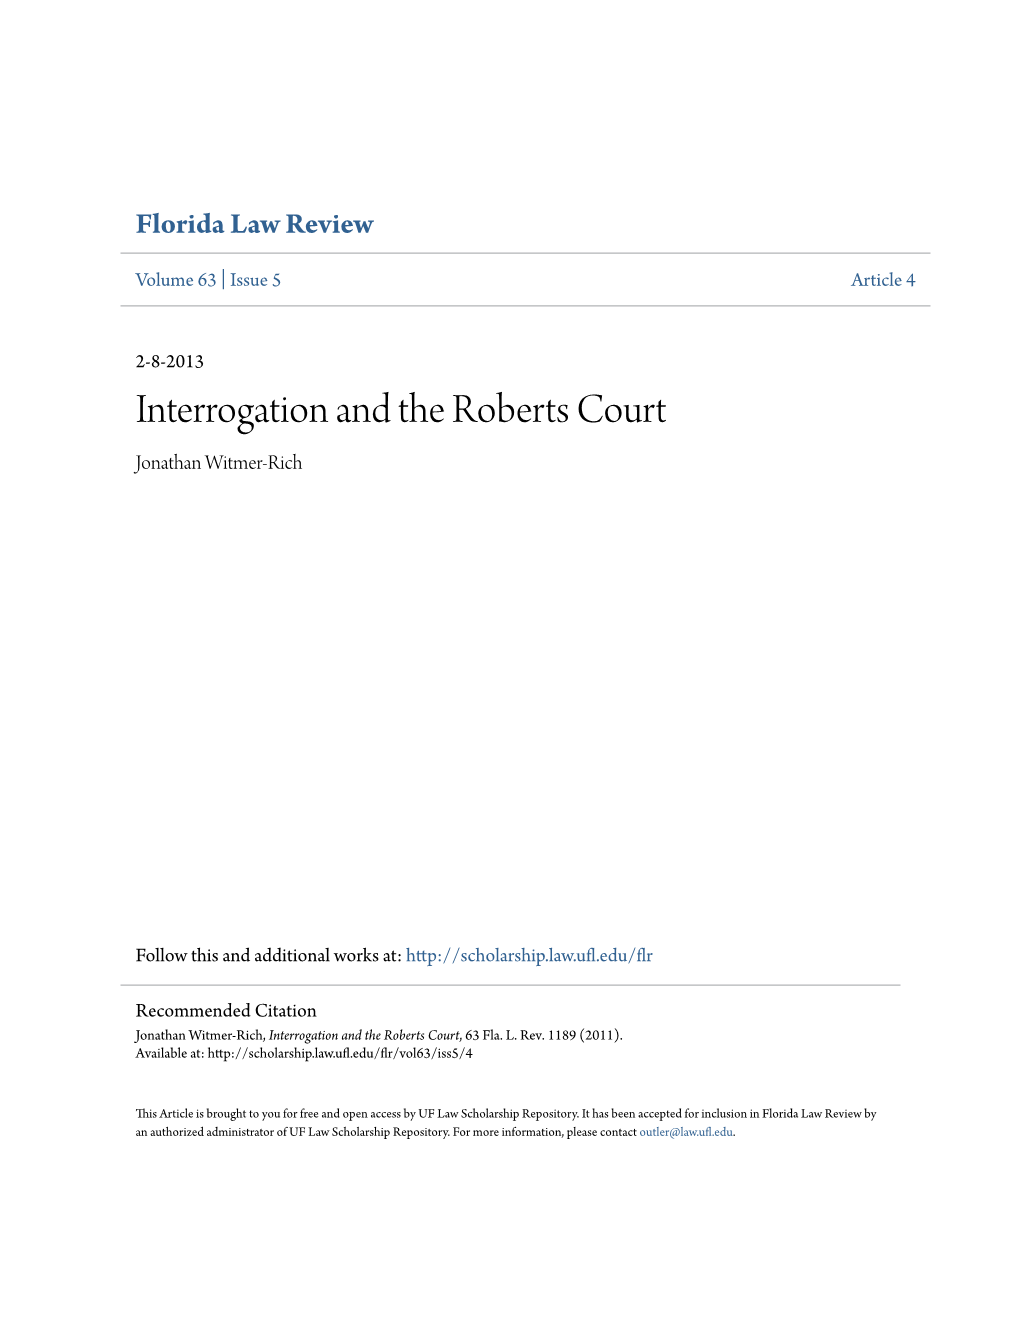 Interrogation and the Roberts Court Jonathan Witmer-Rich